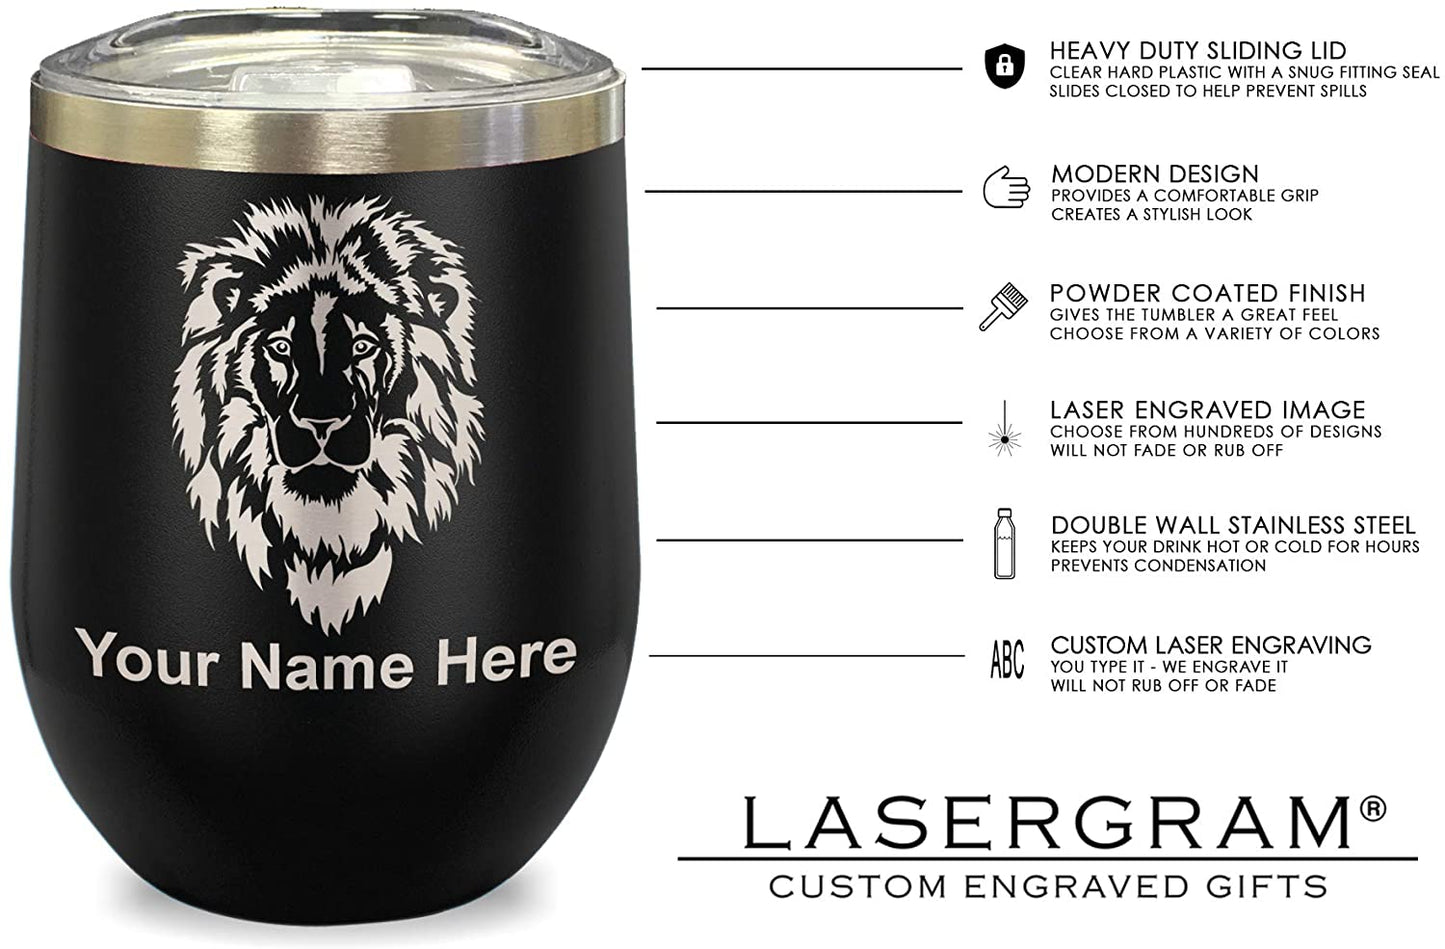 LaserGram Double Wall Stainless Steel Wine Glass, Trombone, Personalized Engraving Included